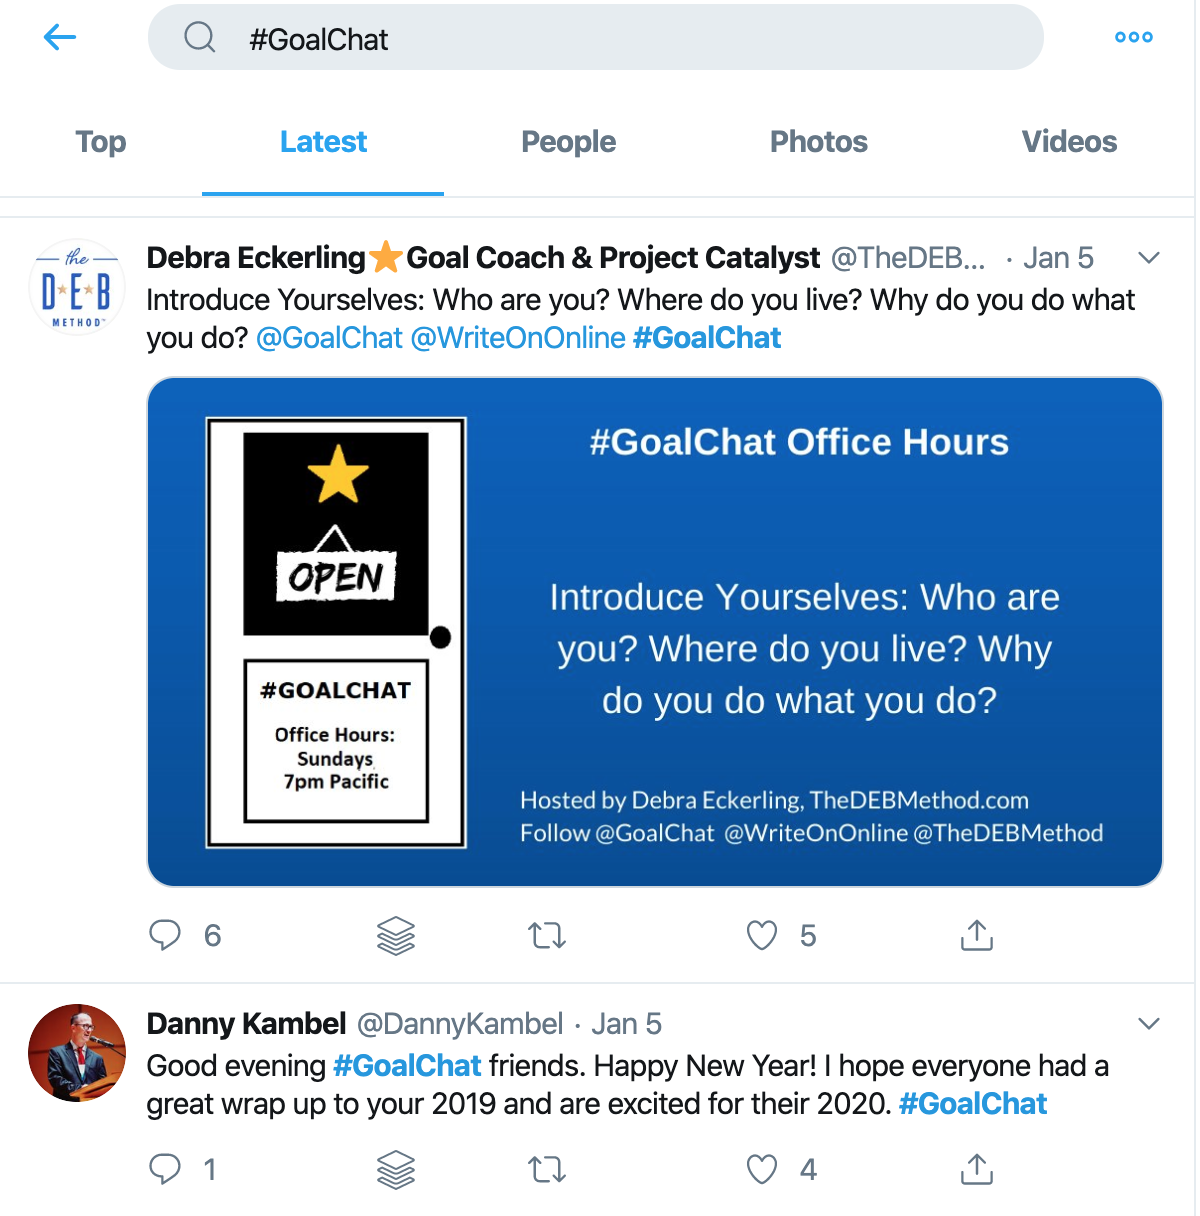 You can follow along with Twitter chats directly from Twitter by searching out the hashtag